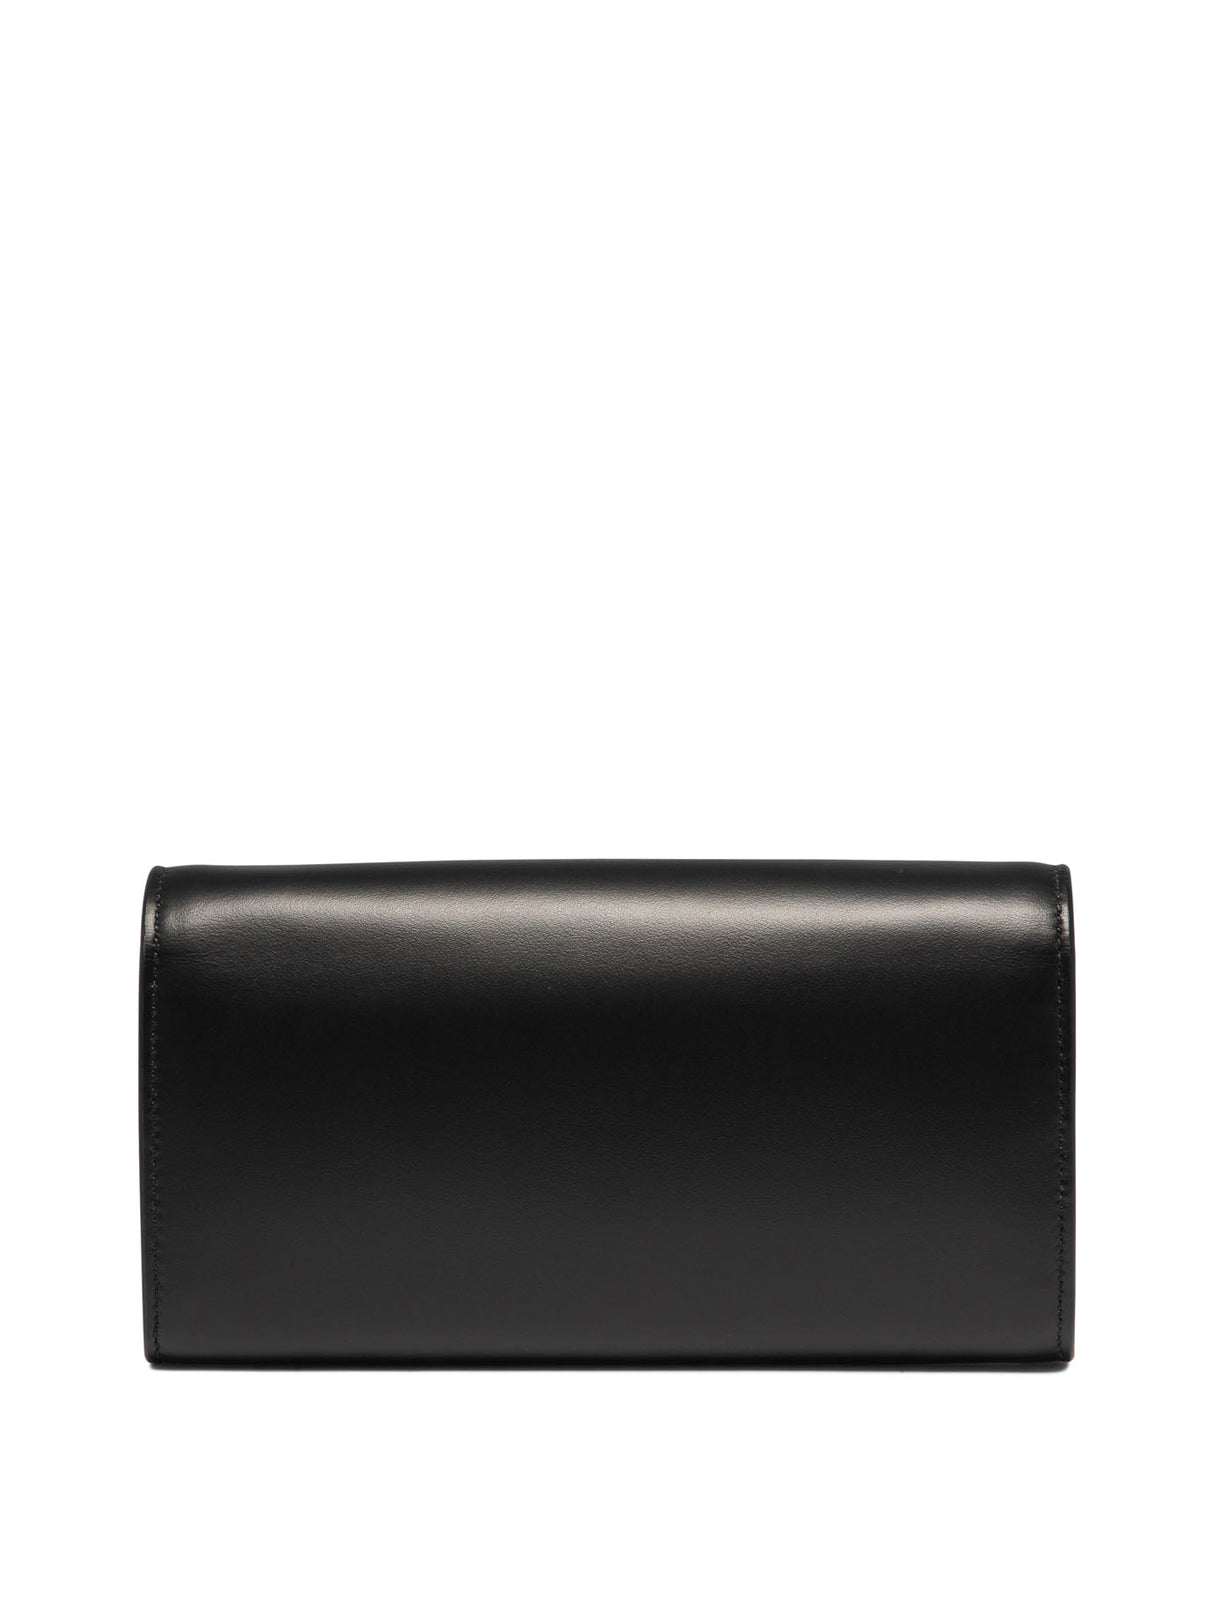 BALMAIN Luxurious Black Leather Wallet on Chain for Sophisticated Women